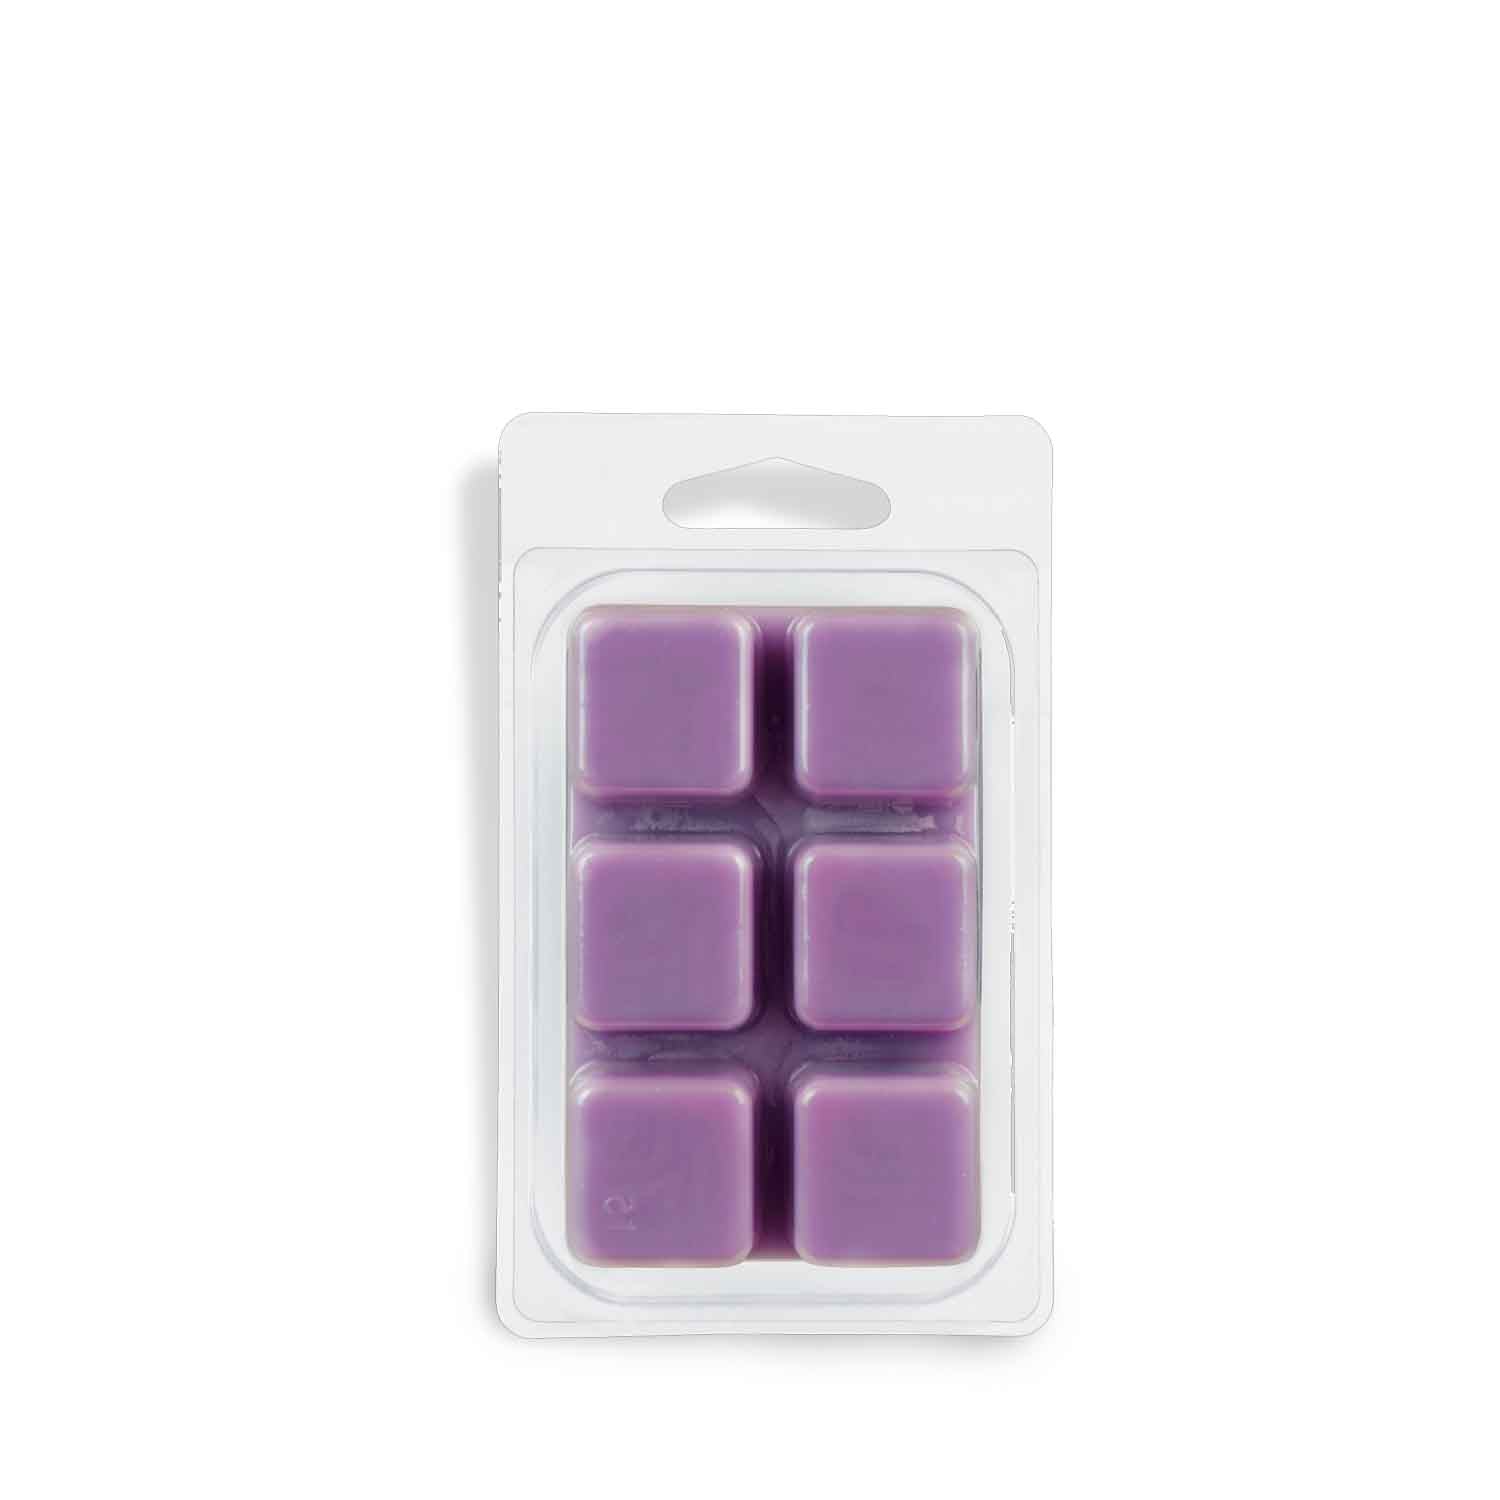 Lilac Blossom - a fragranced wax melt bar from Tuscany Candle